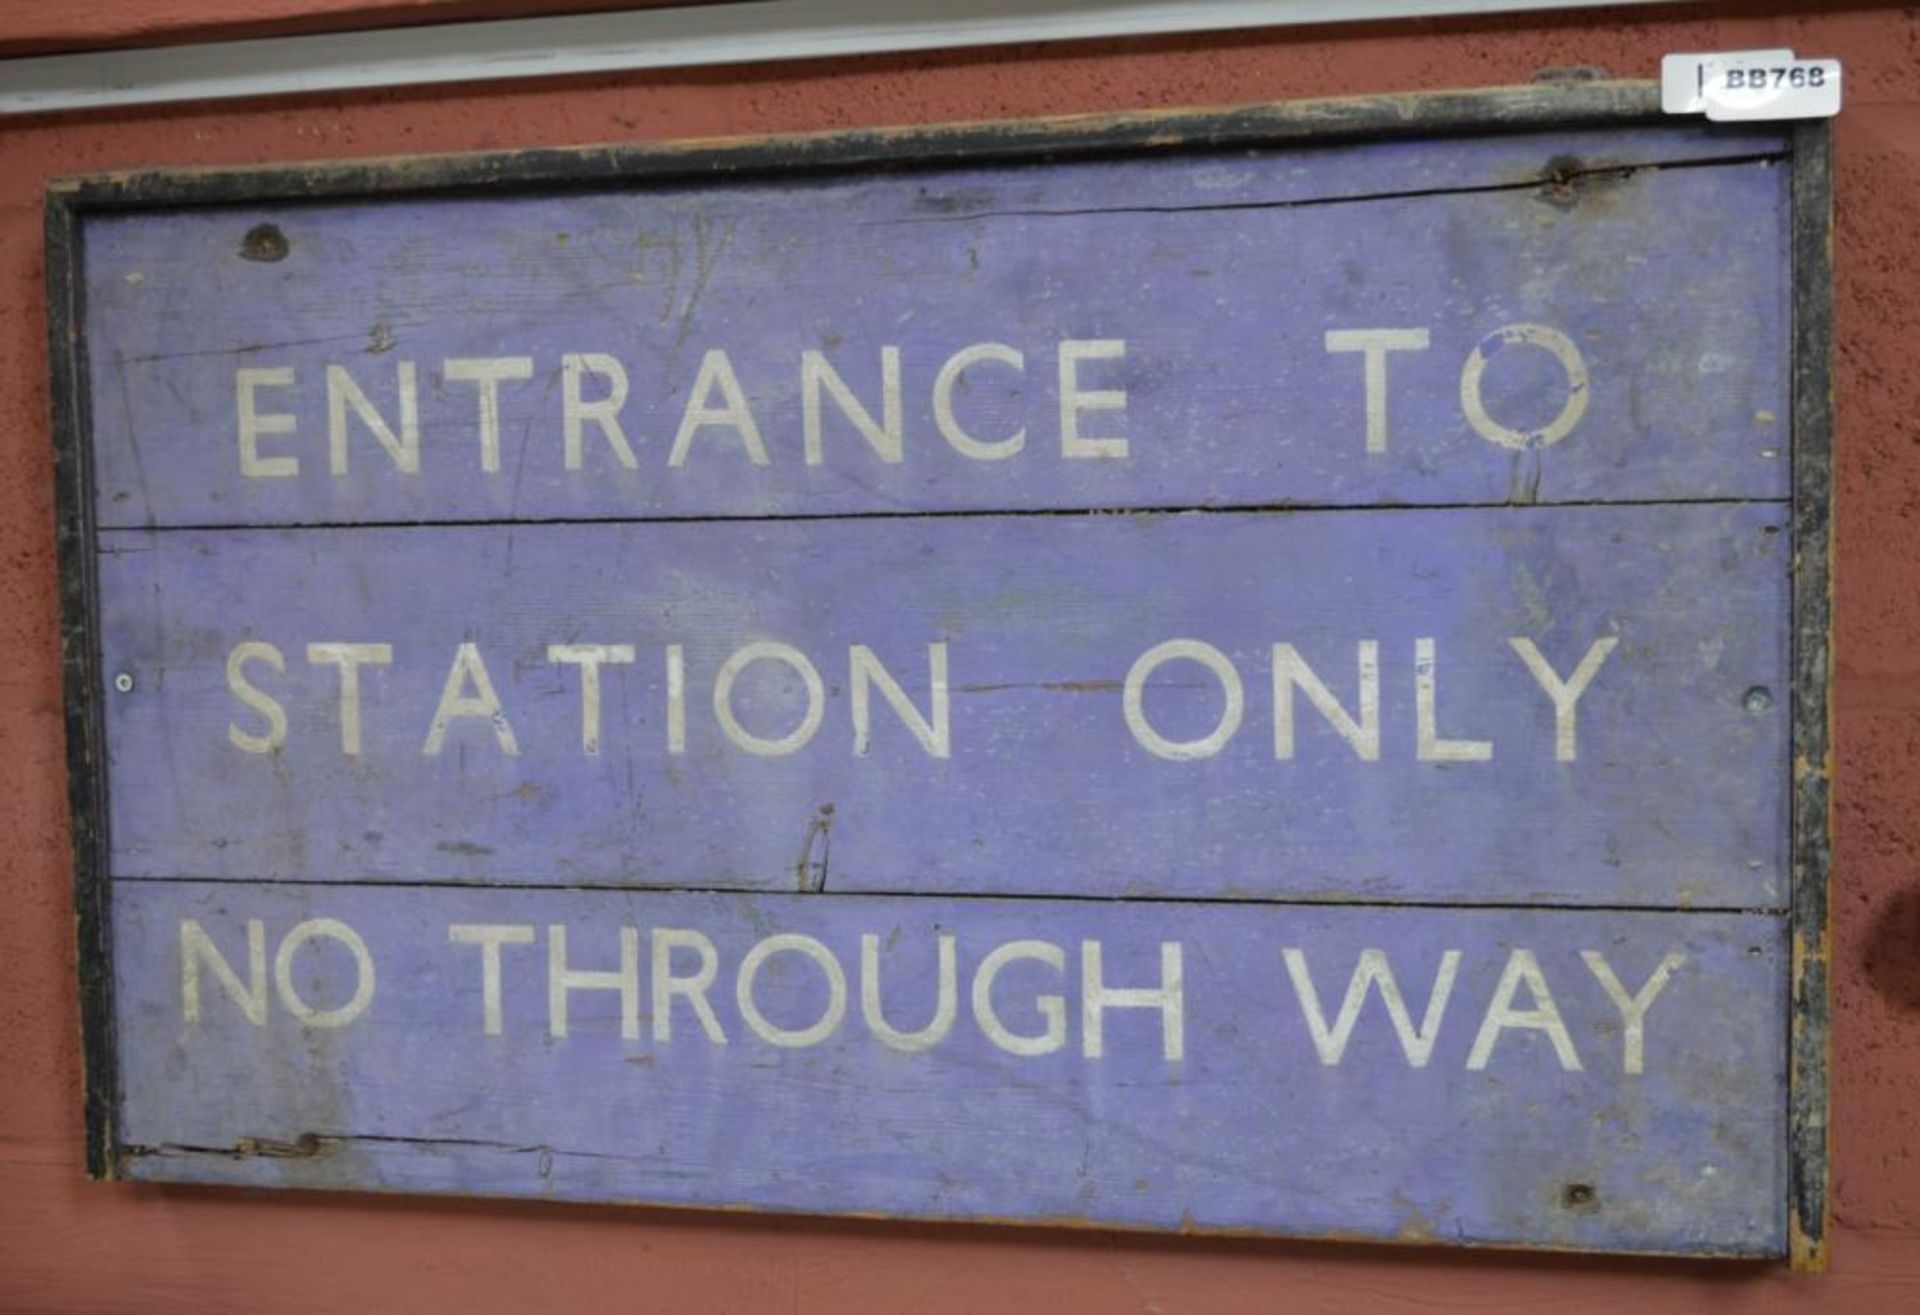 1 x Vintage Train Signage - Entrance To Station Only No Through Way - 32 x 18 Inches - Ref BB768 - C - Image 3 of 5